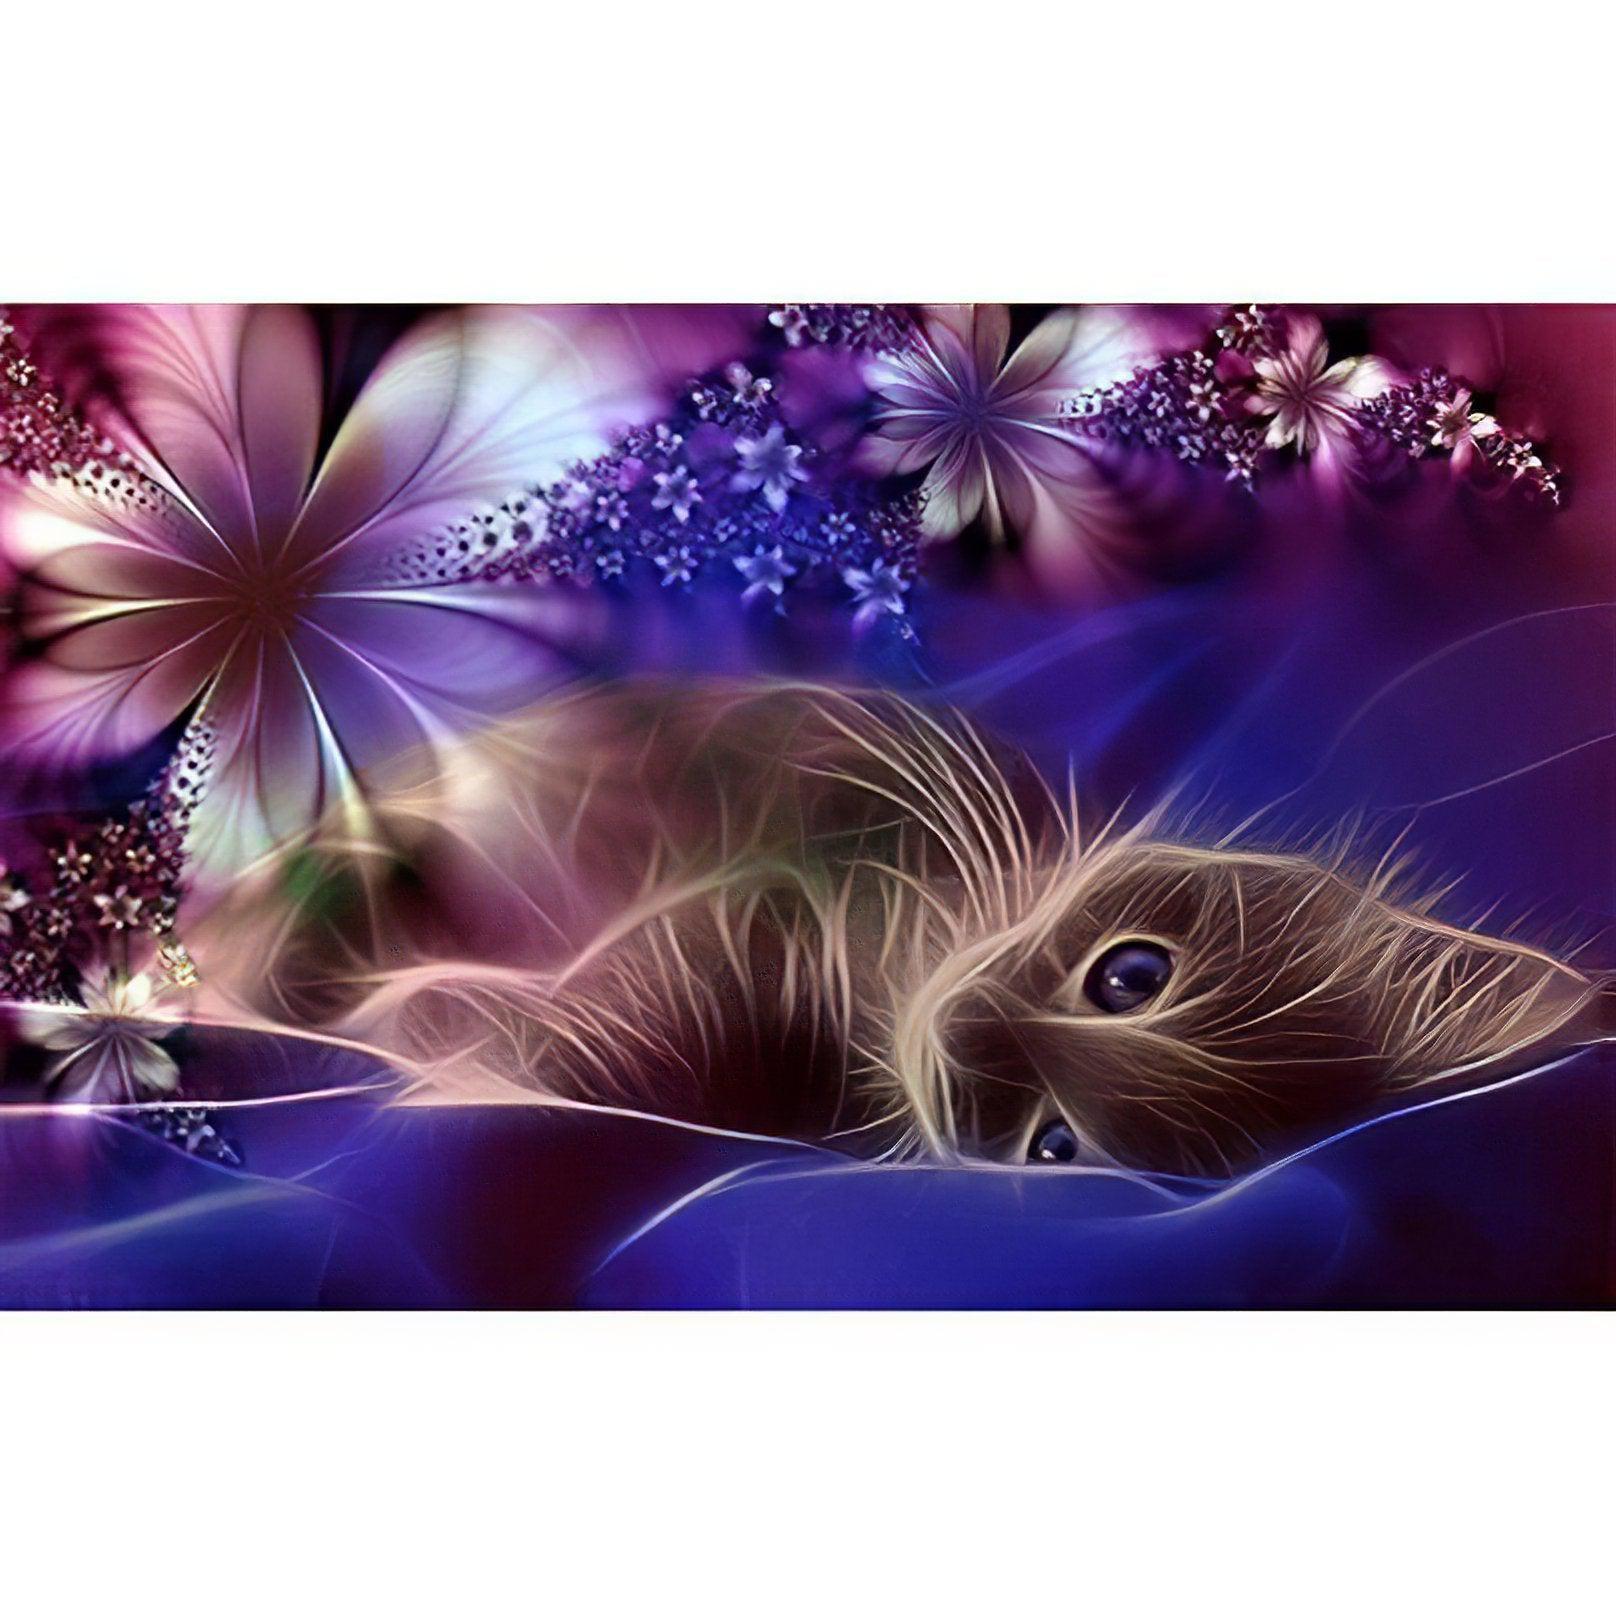 A charming scene of a cat amid blooming flowers, symbolizing beauty and companionship. Cat And Flowers - Diamondartlove